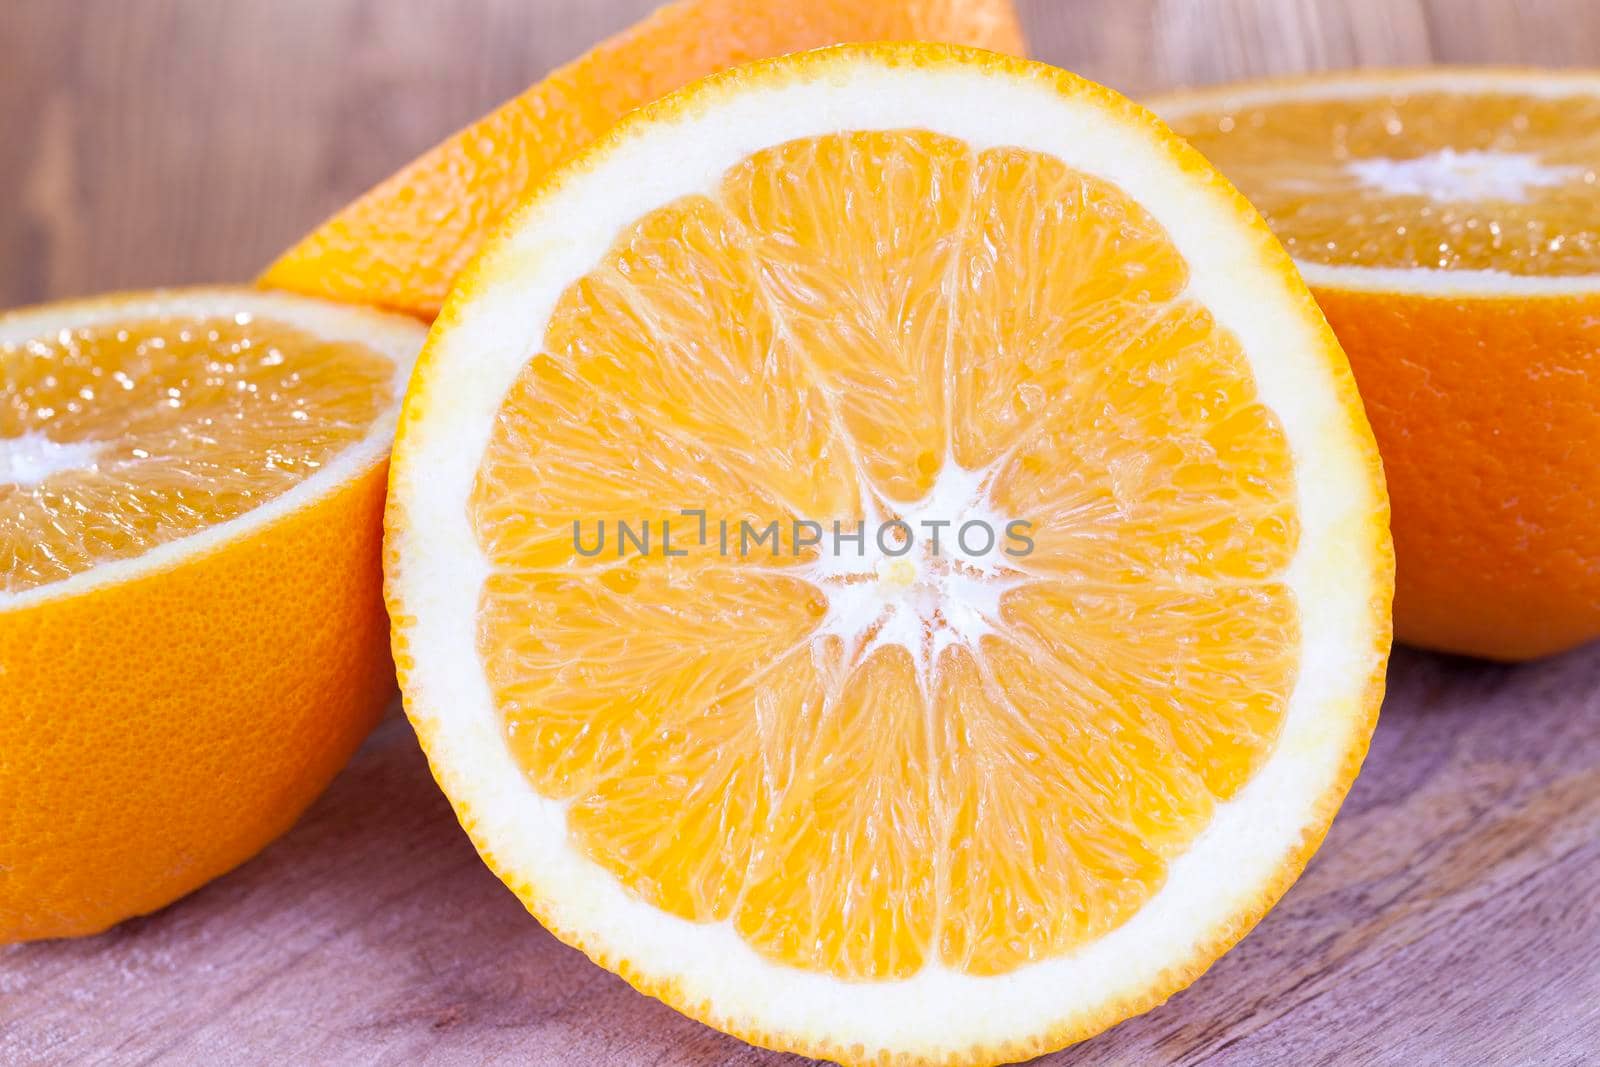 juicy ripe oranges, some of which are cut in half, closeup